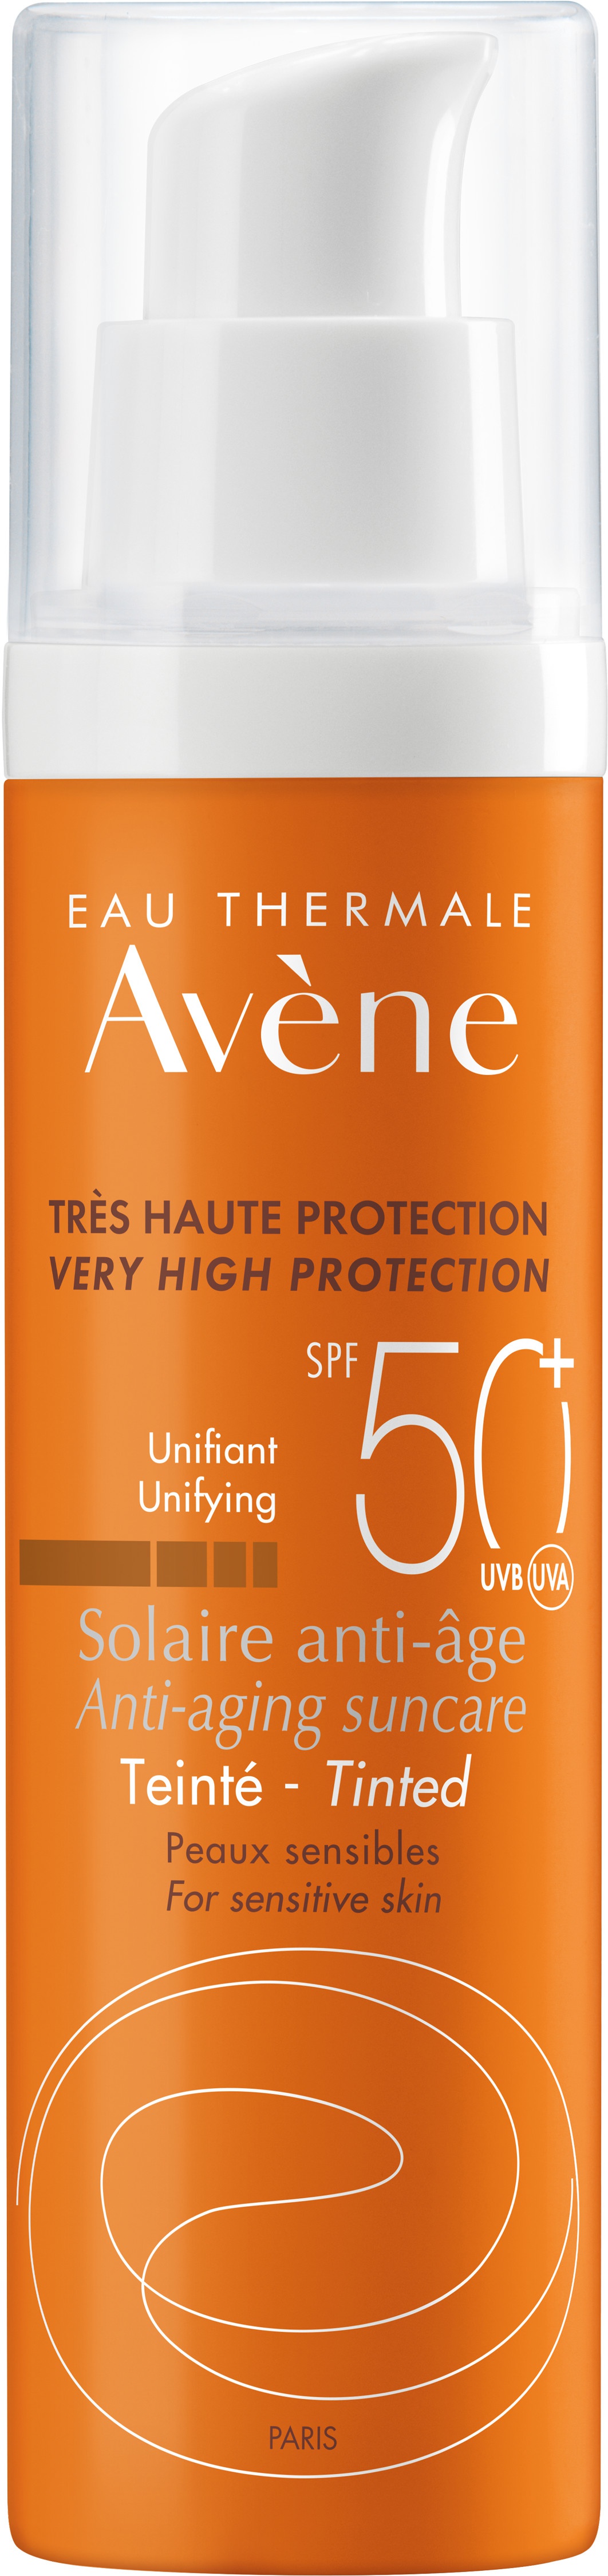 Avene Very High Protection Tinted Suncare For Ageing Skin SPF50+